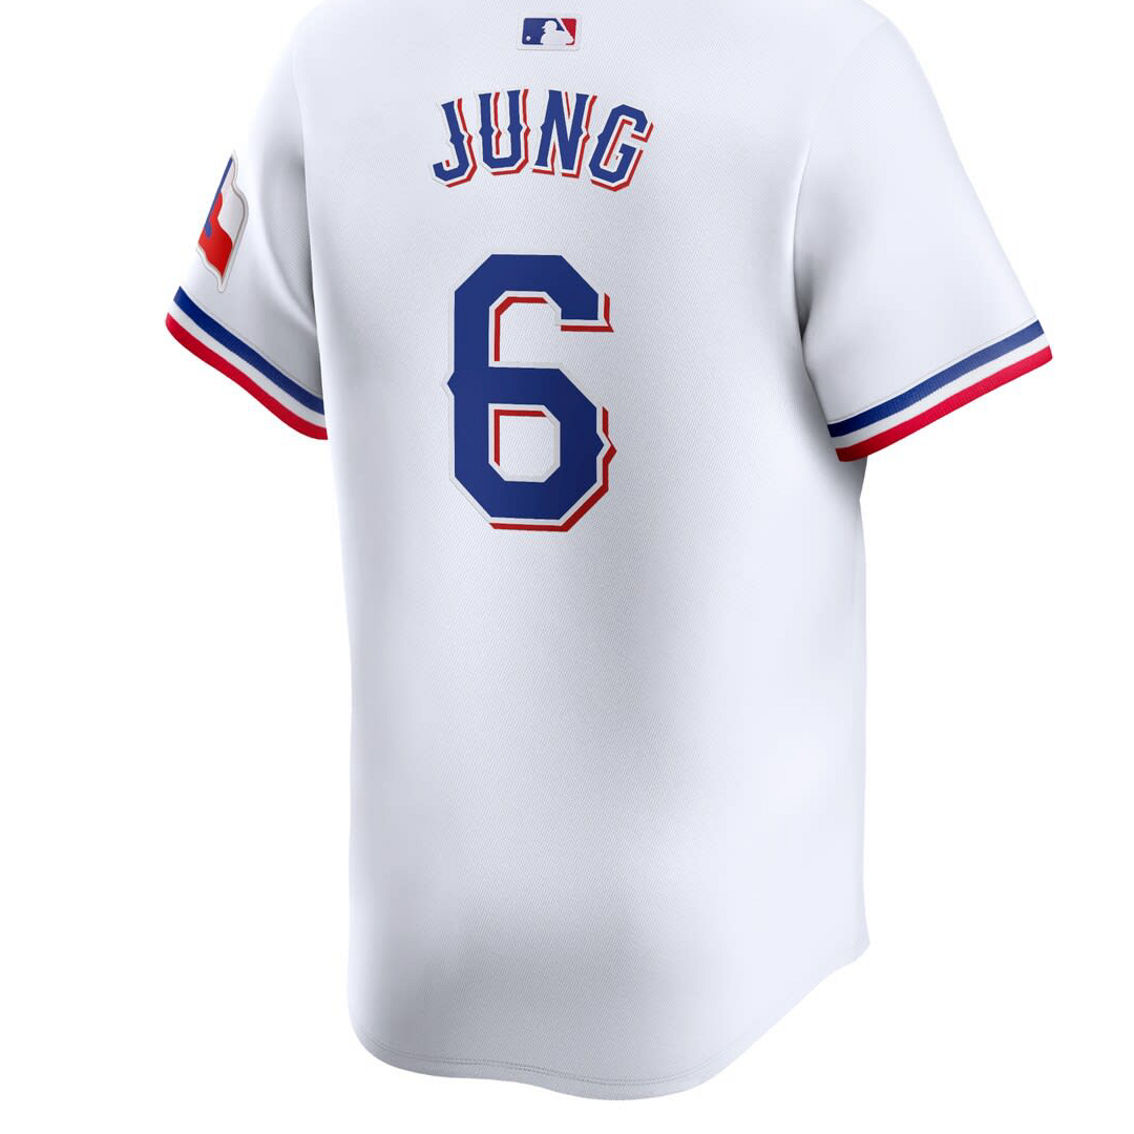 Nike Men's Josh Jung White Texas Rangers Home Limited Player Jersey - Image 4 of 4